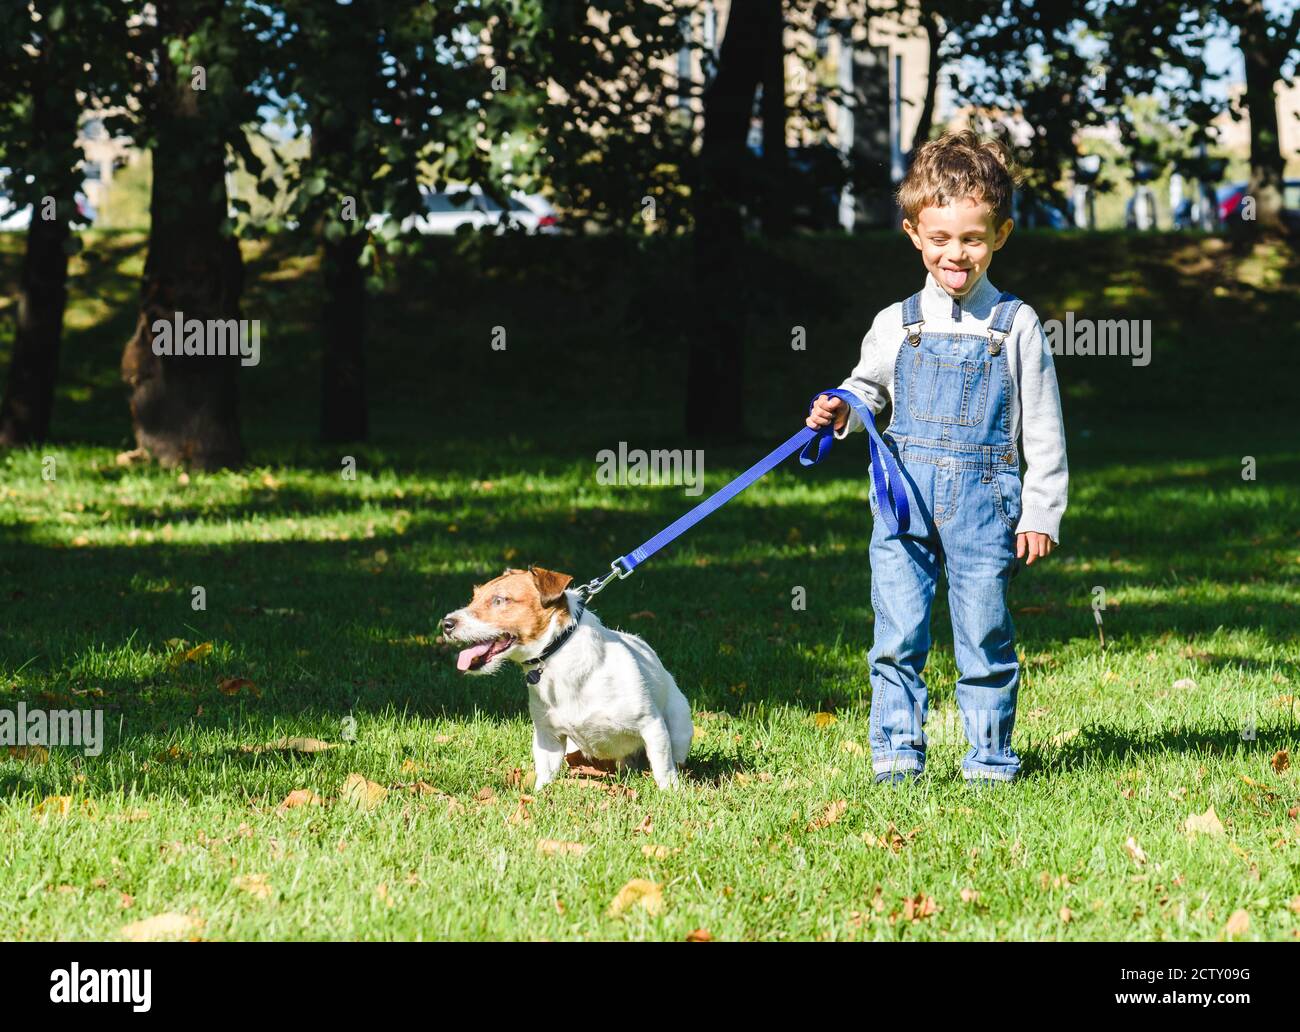 Amusing kid boy copying and teasing dog with tongue out Stock Photo